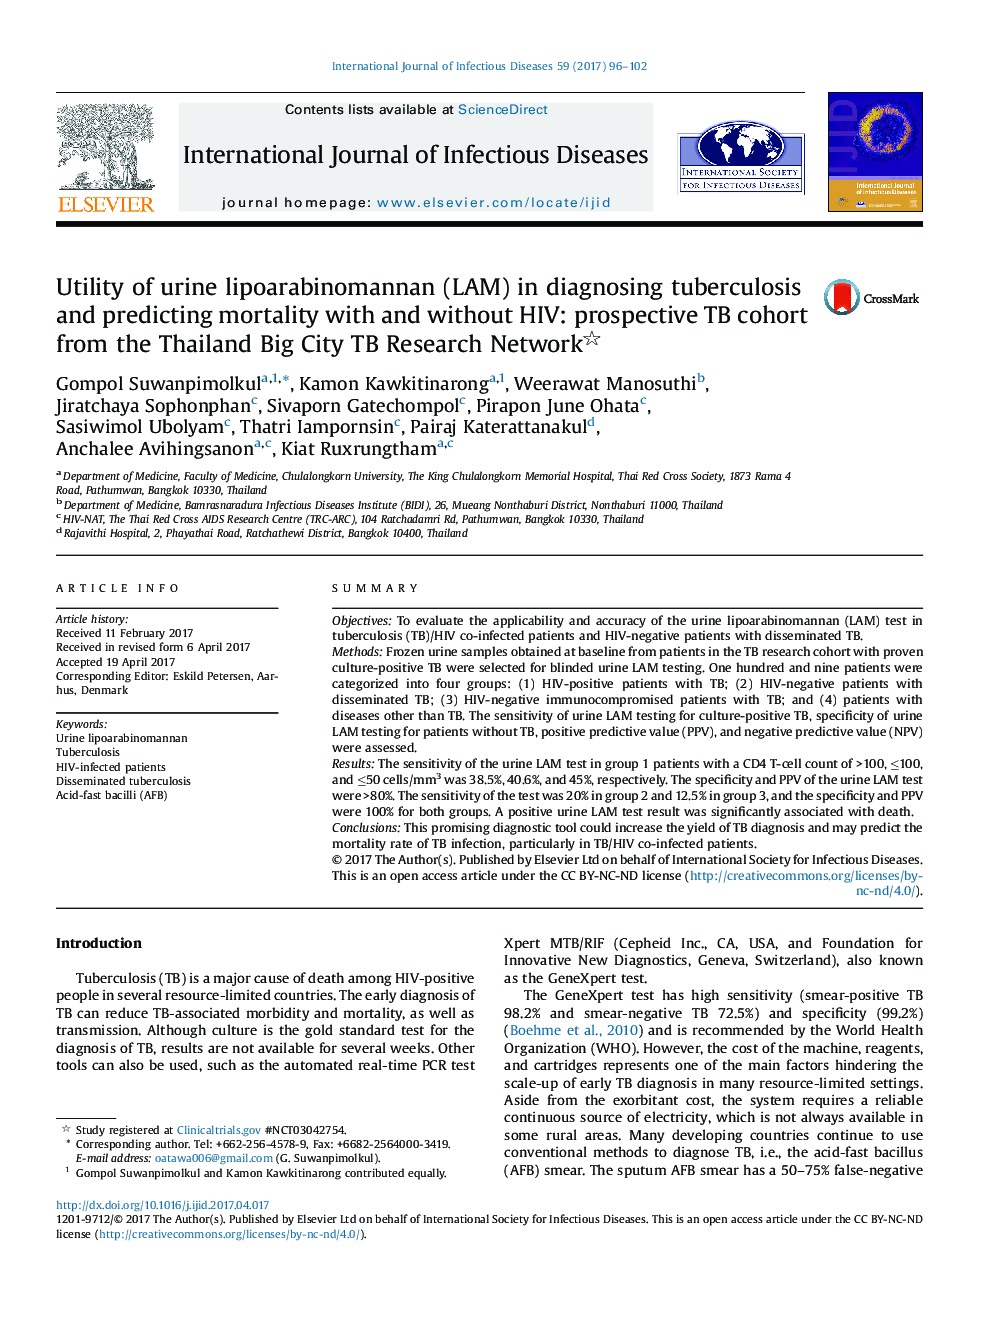 Utility of urine lipoarabinomannan (LAM) in diagnosing tuberculosis and predicting mortality with and without HIV: prospective TB cohort from the Thailand Big City TB Research Network